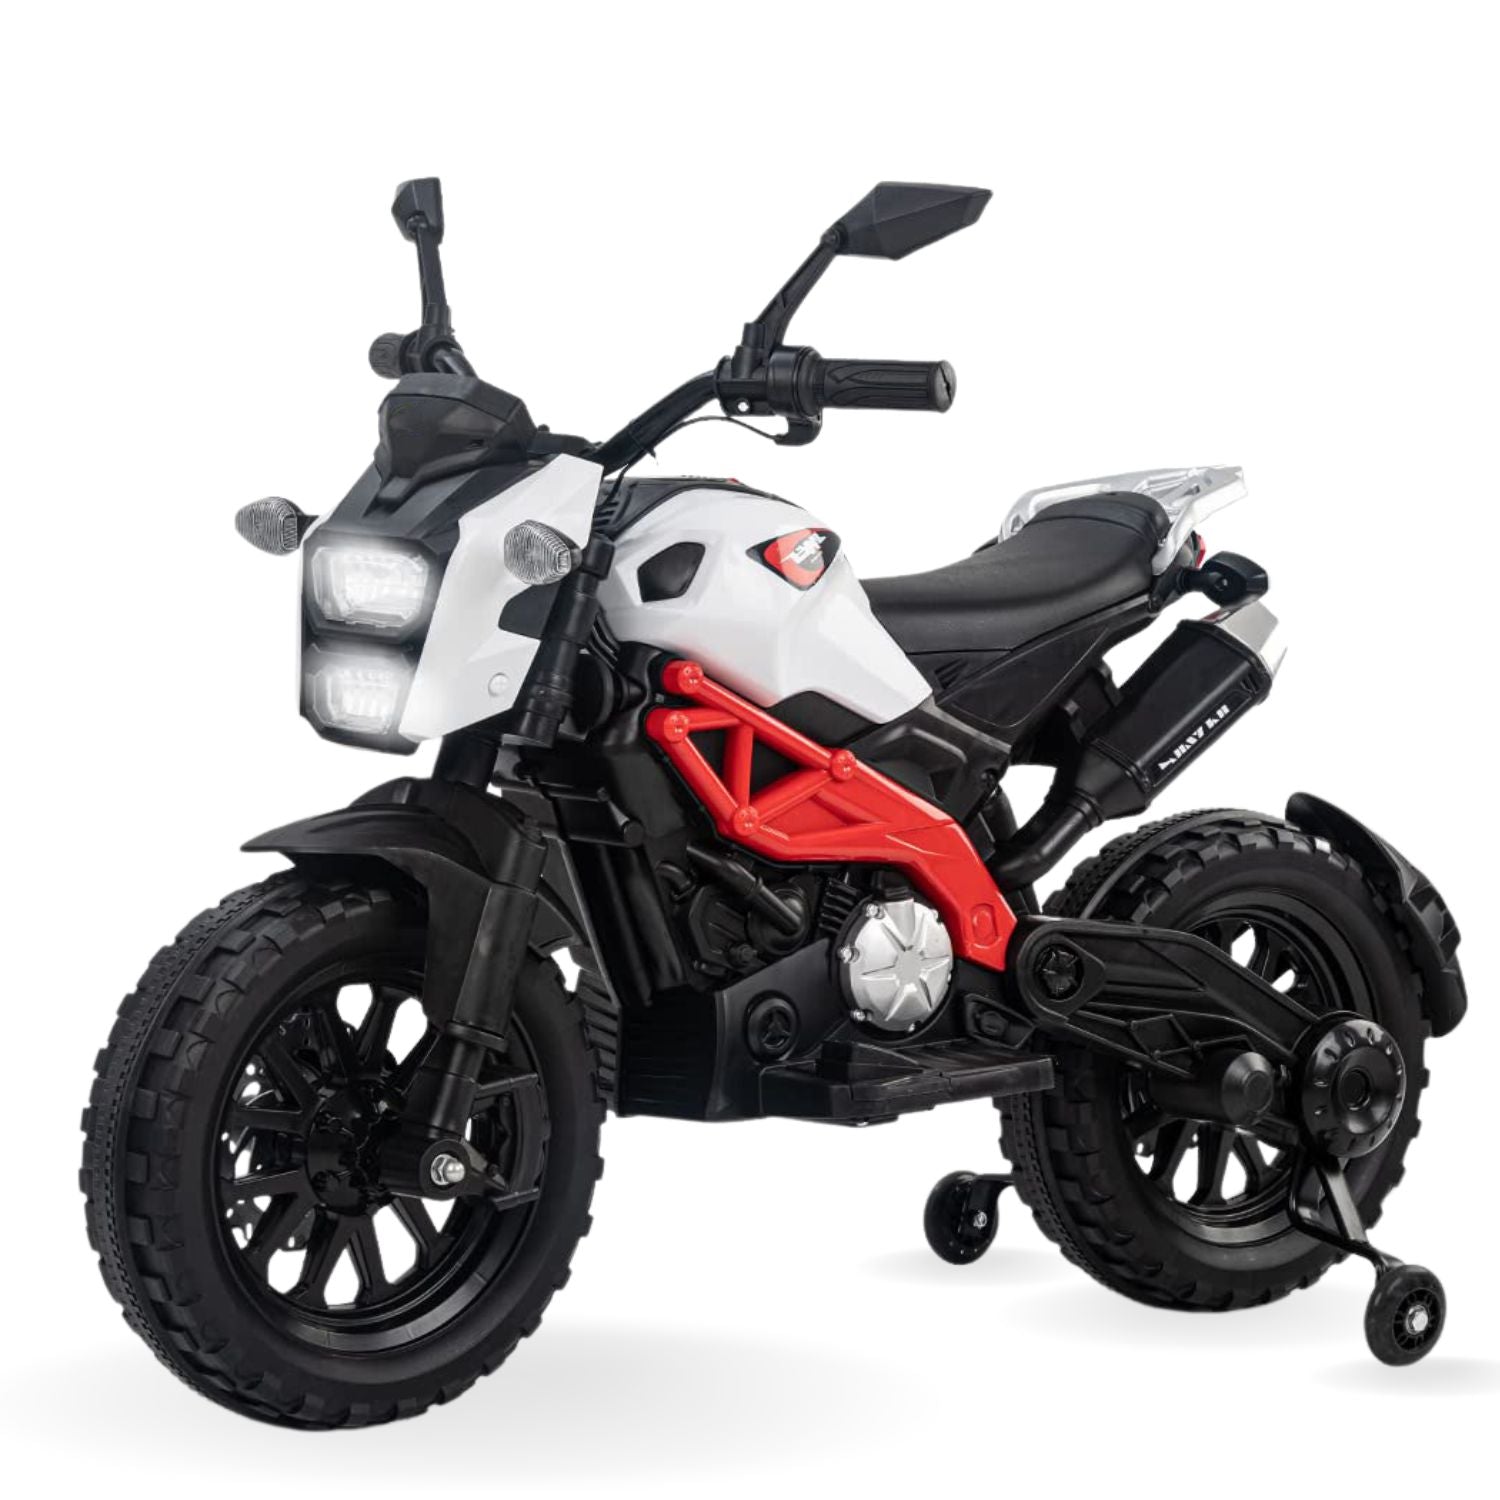 Baby Moo Electric Ride-on Bike for Kids | Battery-Powered Toy with LED Lights, Music, and USB Port | Battery Operated Bike - White - Baby Moo